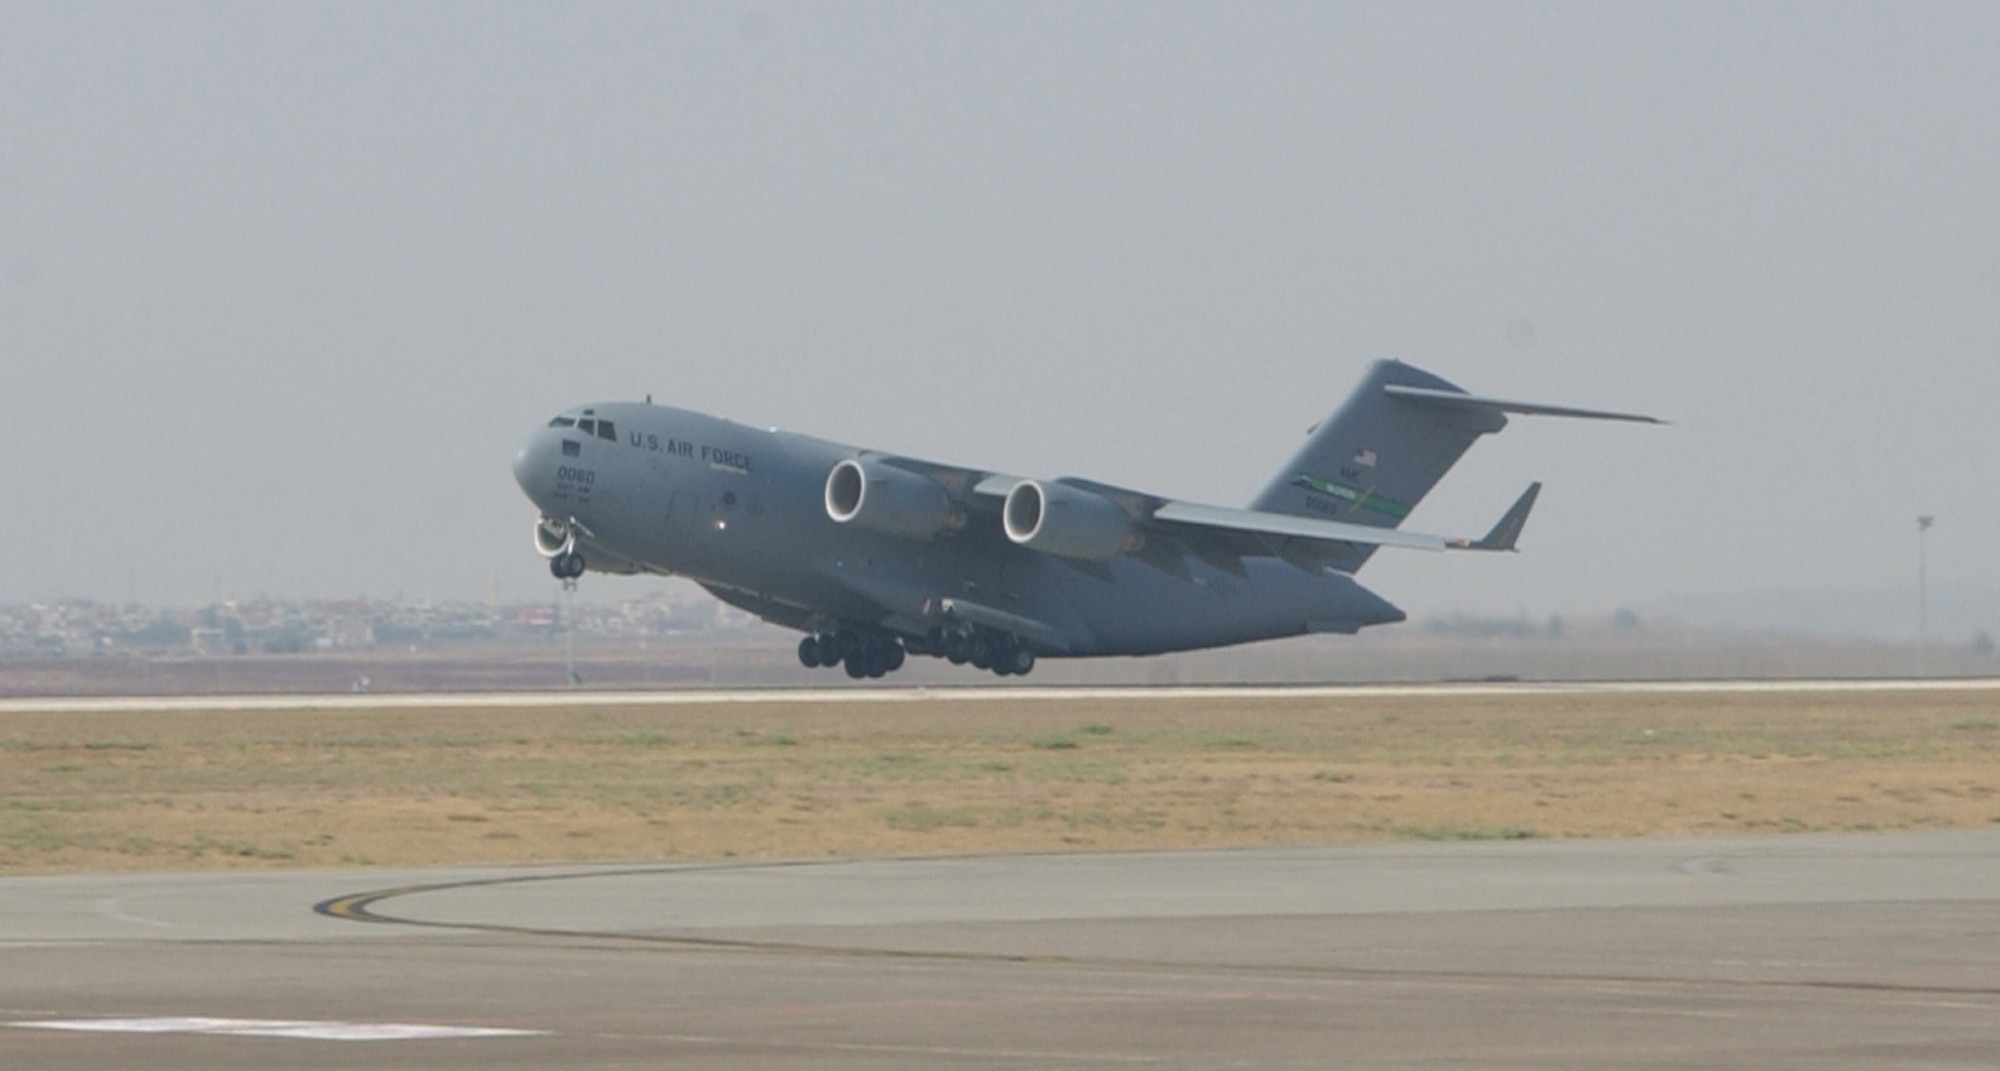 INCIRLIK AIR BASE, Turkey -- A C-17 Globemaster III takes off from Incirlik Air Base, Turkey in remembrance of Sept. 11, on Sept 11. The C-17 took flight at 3:46 p.m., EEST (Turkey time), to commemorate when Flight 11 hit the North Tower of the World Trade Center at 8:46 a.m. EDT  (U.S. Air Force photo by Airman First Class Tiffany A. Colburn).                              